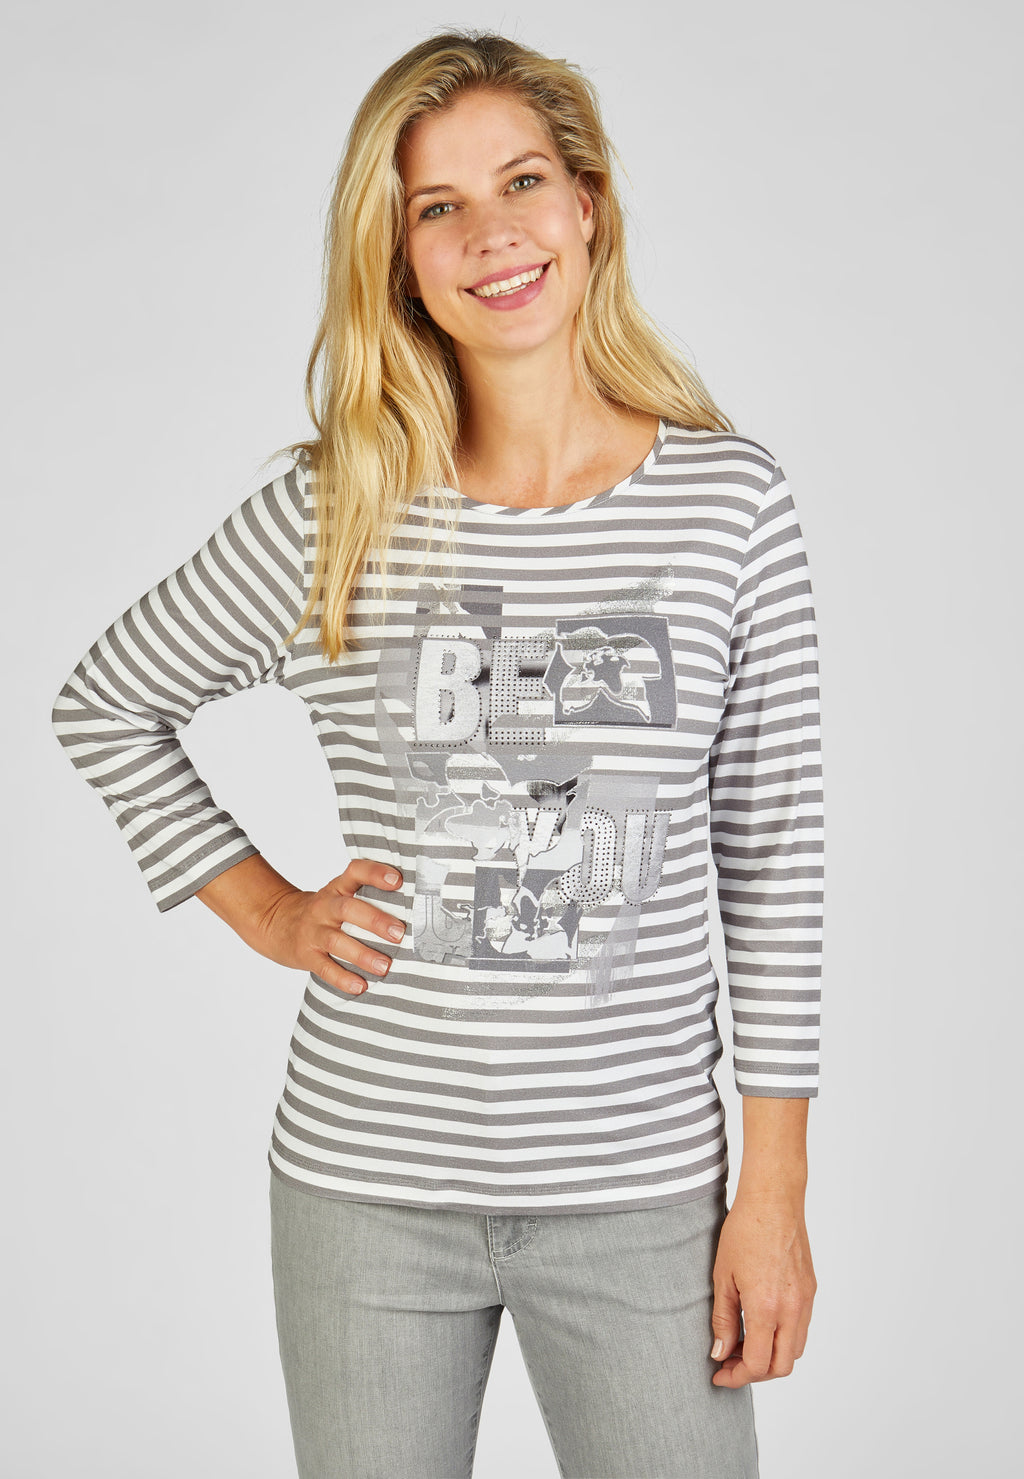 Rabe magnolia park grey and white striped top, product code 52-113356